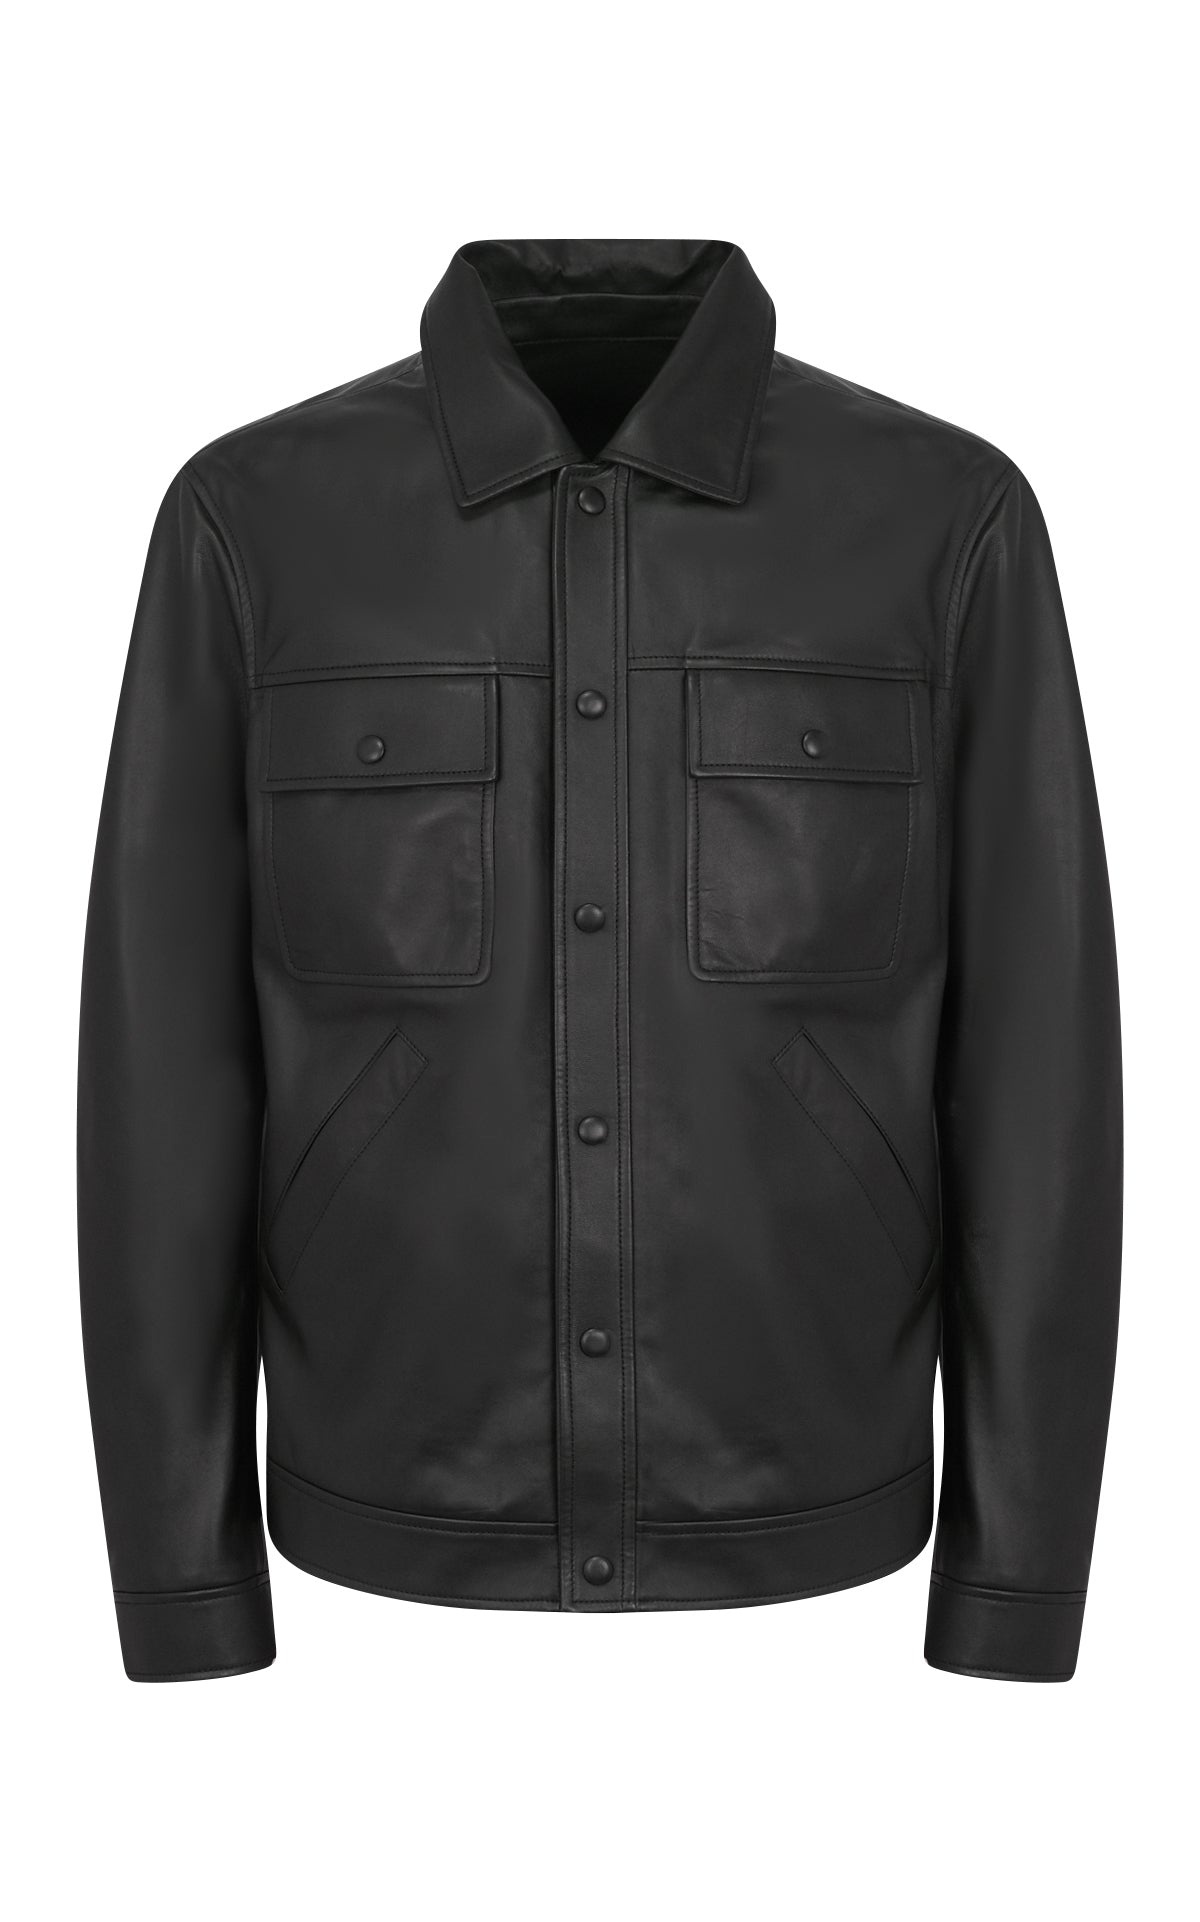 Levy Jacket in Black Nappa Leather - 1